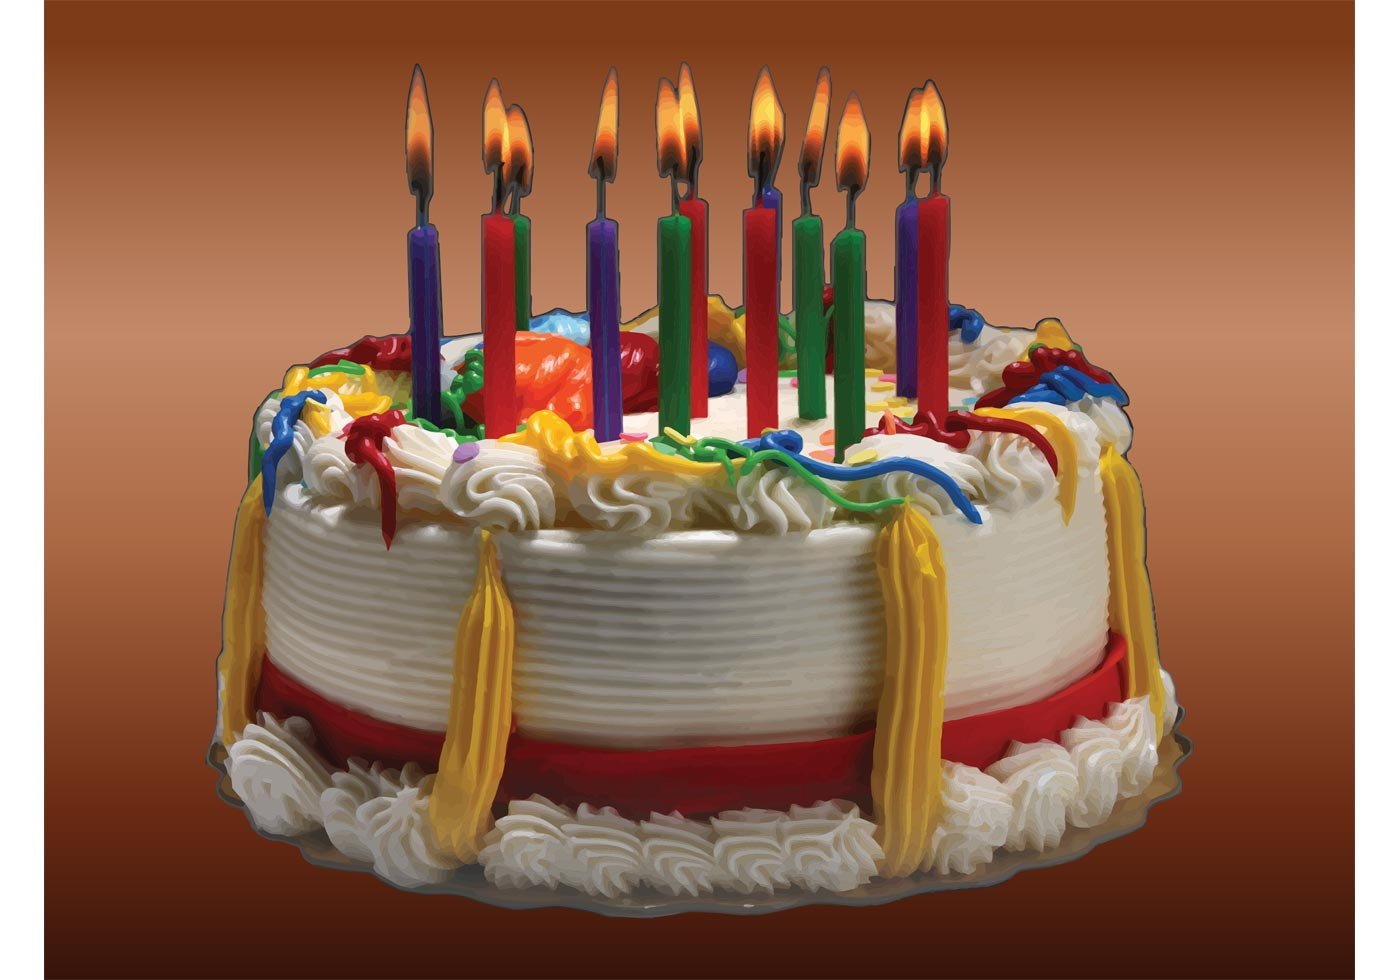 The Best Birthday Cake Picture Free Download - Home, Family, Style and